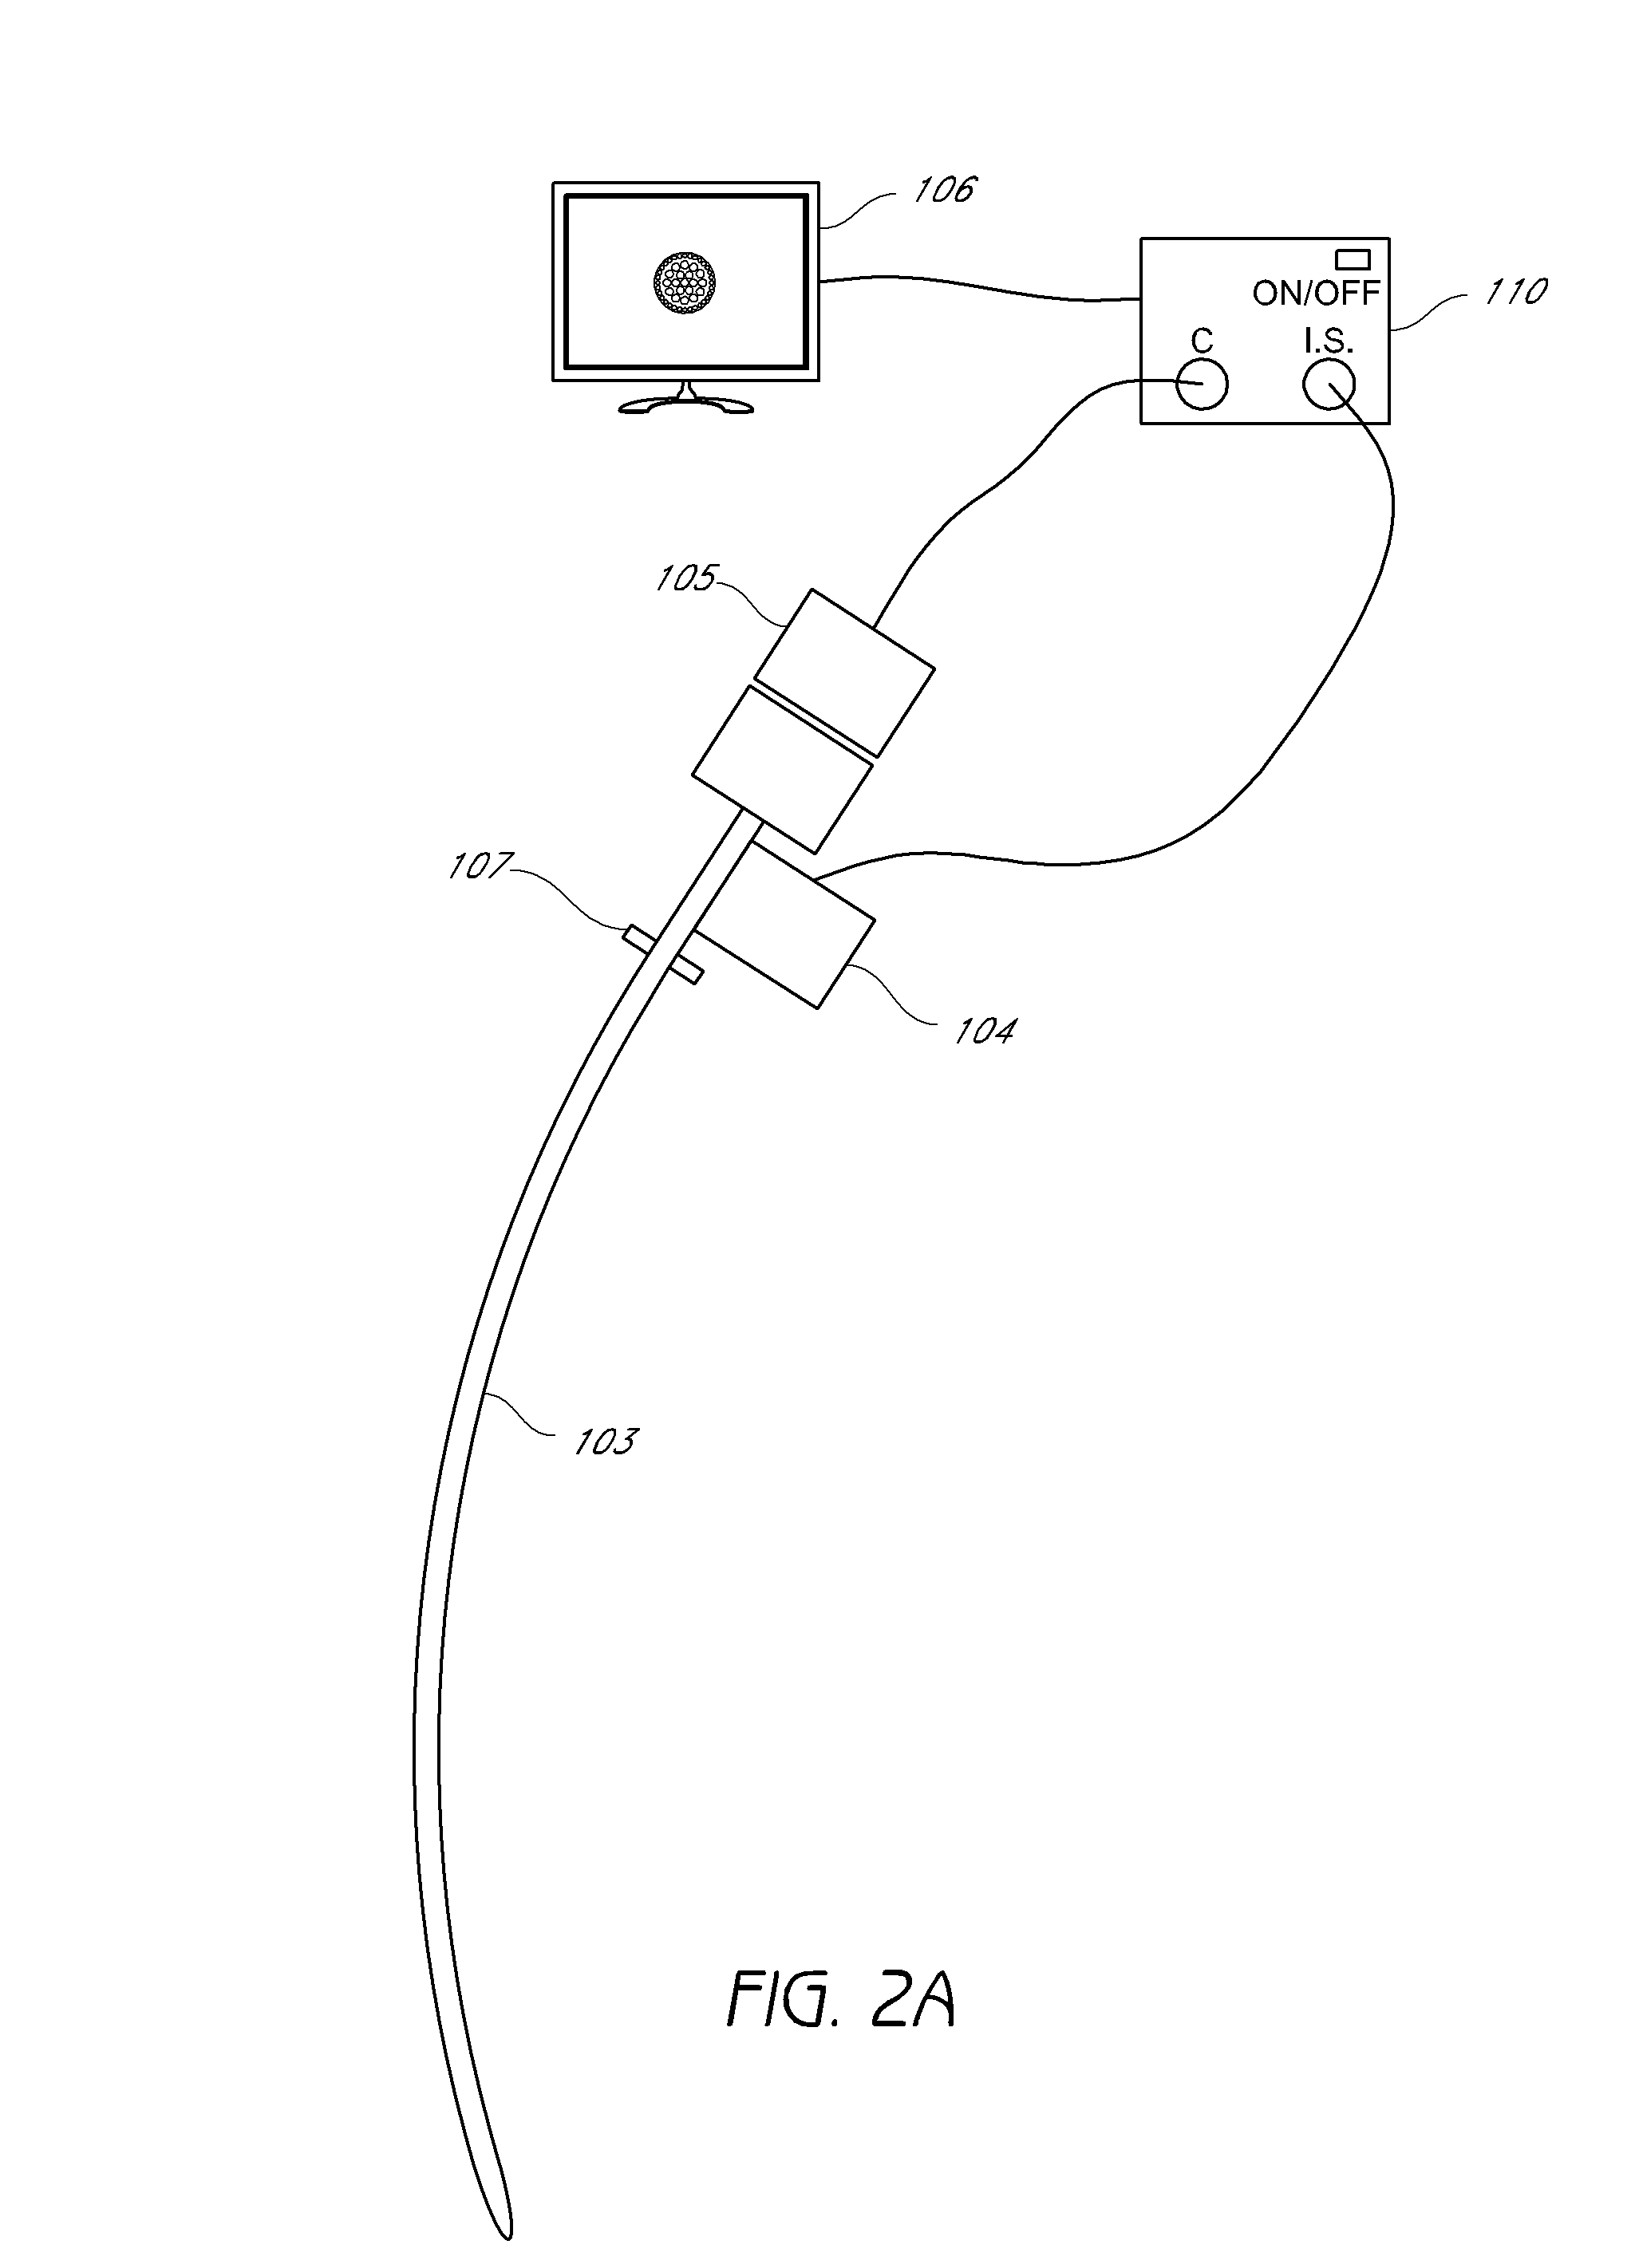 Endotracheal tube coupling adapters